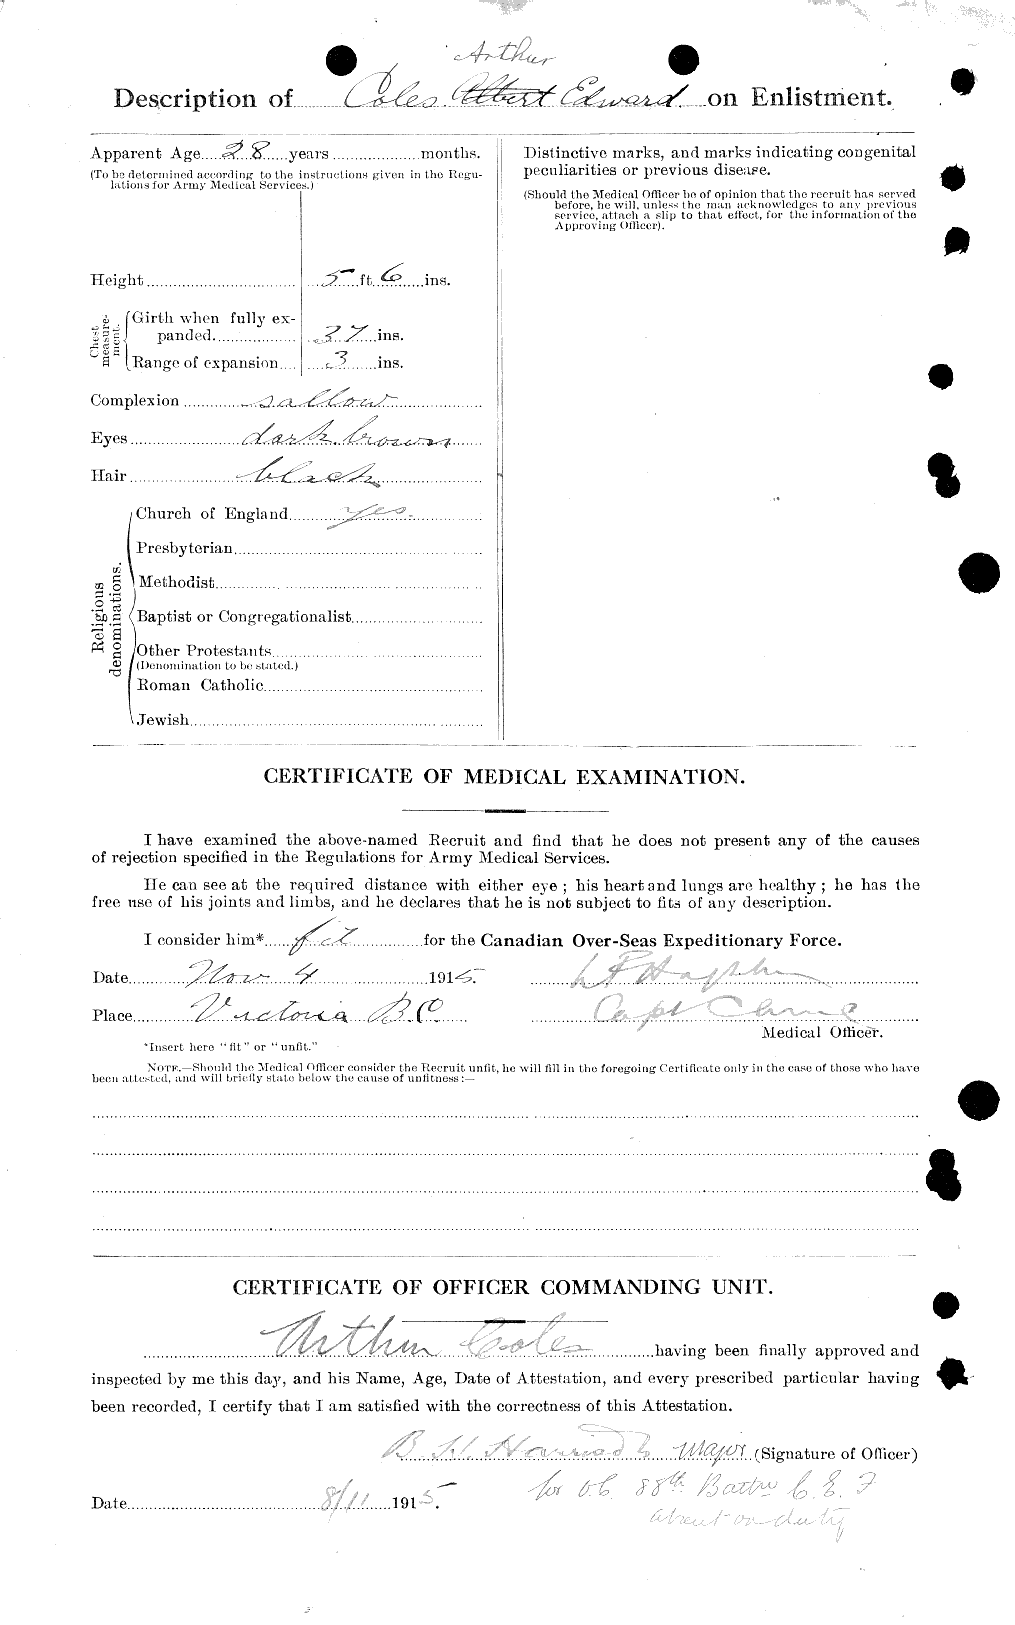 Personnel Records of the First World War - CEF 028341b